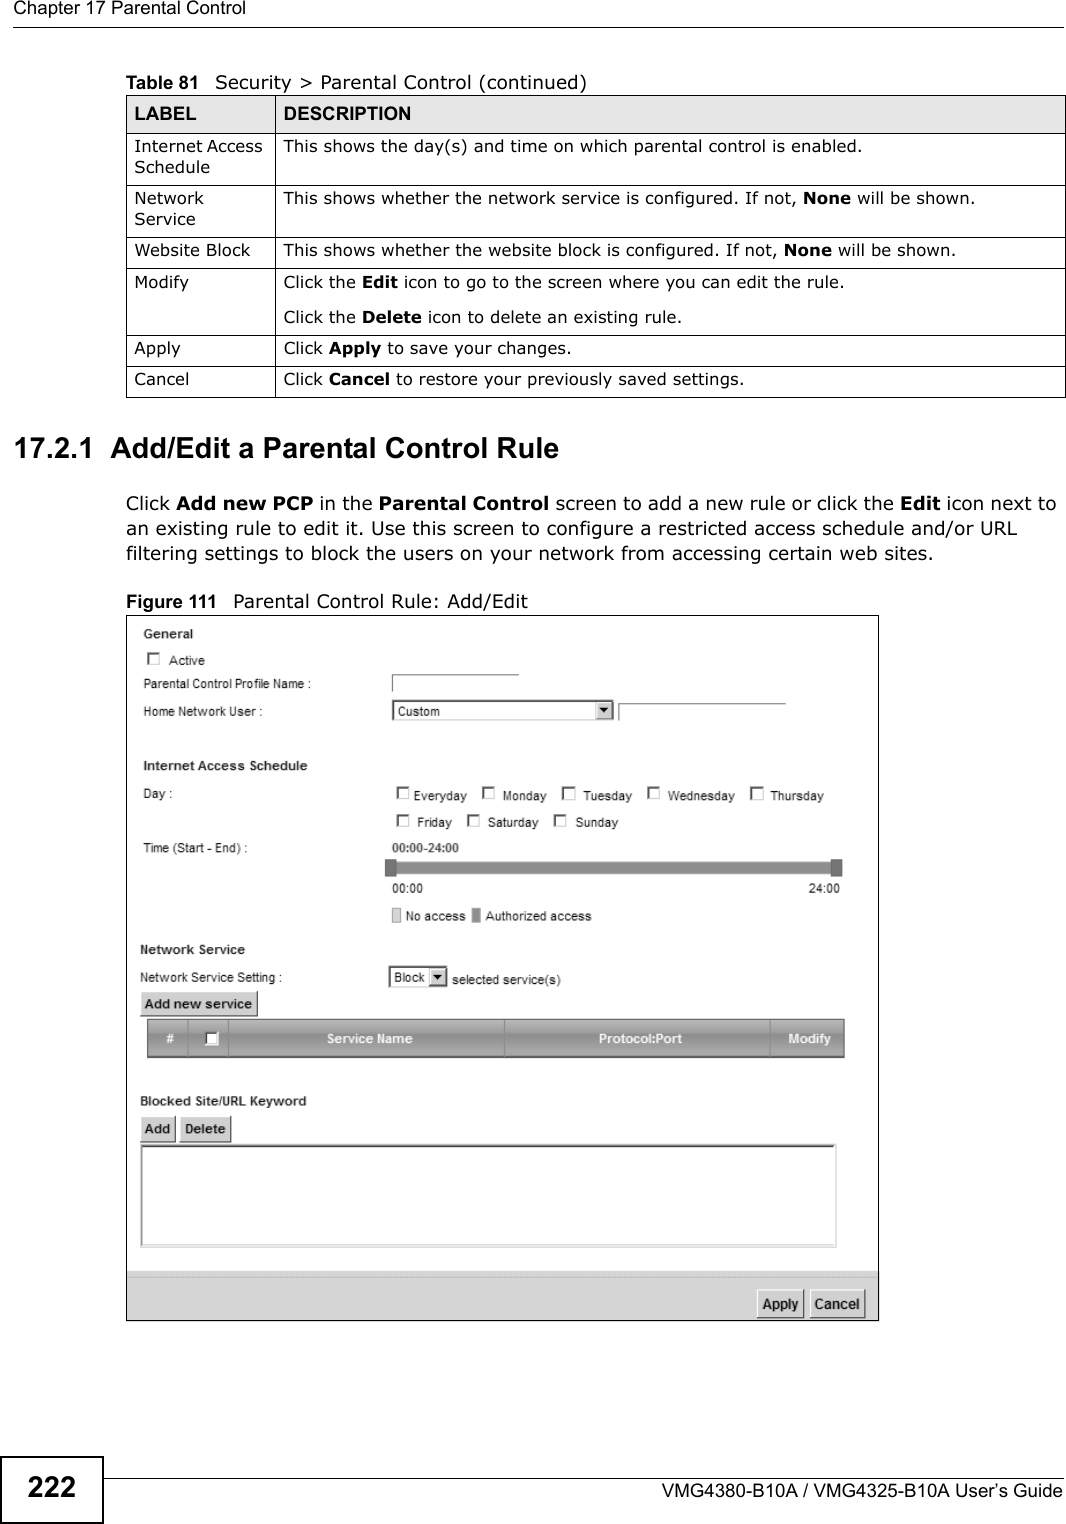 Chapter 17 Parental ControlVMG4380-B10A / VMG4325-B10A User’s Guide22217.2.1  Add/Edit a Parental Control RuleClick Add new PCP in the Parental Control screen to add a new rule or click the Edit icon next to an existing rule to edit it. Use this screen to configure a restricted access schedule and/or URL filtering settings to block the users on your network from accessing certain web sites.Figure 111 Parental Control Rule: Add/Edit Internet AccessScheduleThis shows the day(s) and time on which parental control is enabled.Network ServiceThis shows whether the network service is configured. If not, None will be shown.Website Block This shows whether the website block is configured. If not, None will be shown.Modify Click the Edit icon to go to the screen where you can edit the rule.Click the Delete icon to delete an existing rule.Apply Click Apply to save your changes.Cancel Click Cancel to restore your previously saved settings.Table 81   Security &gt; Parental Control (continued)LABEL DESCRIPTION